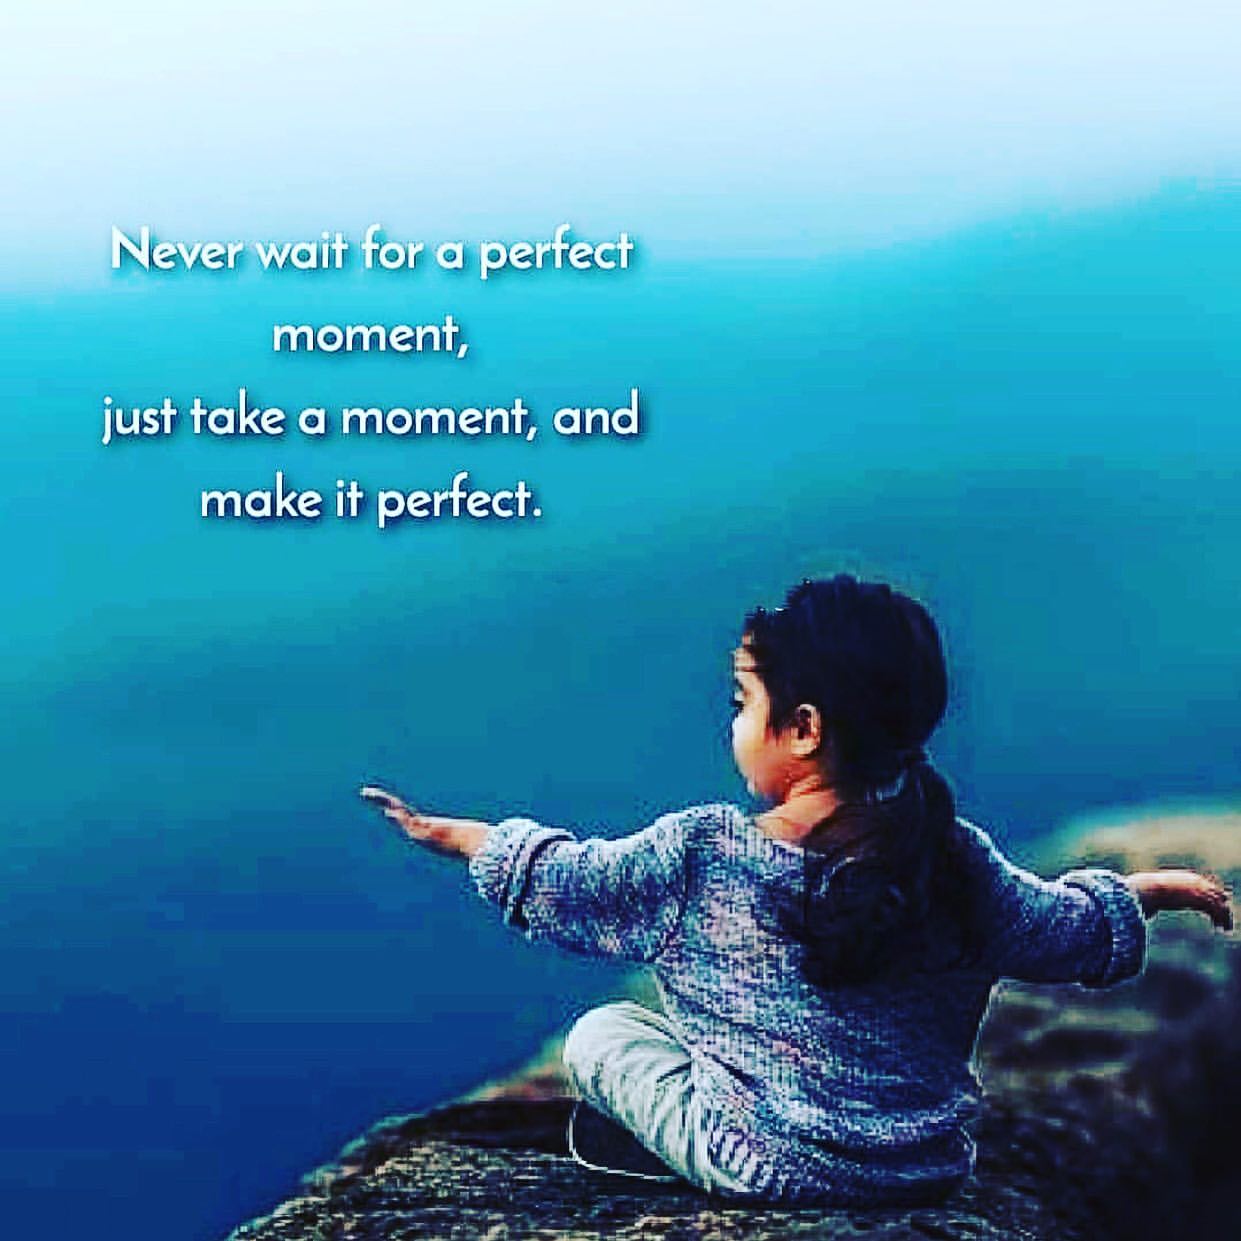 Never wait for a perfect moment, just take a moment, and make it perfect.